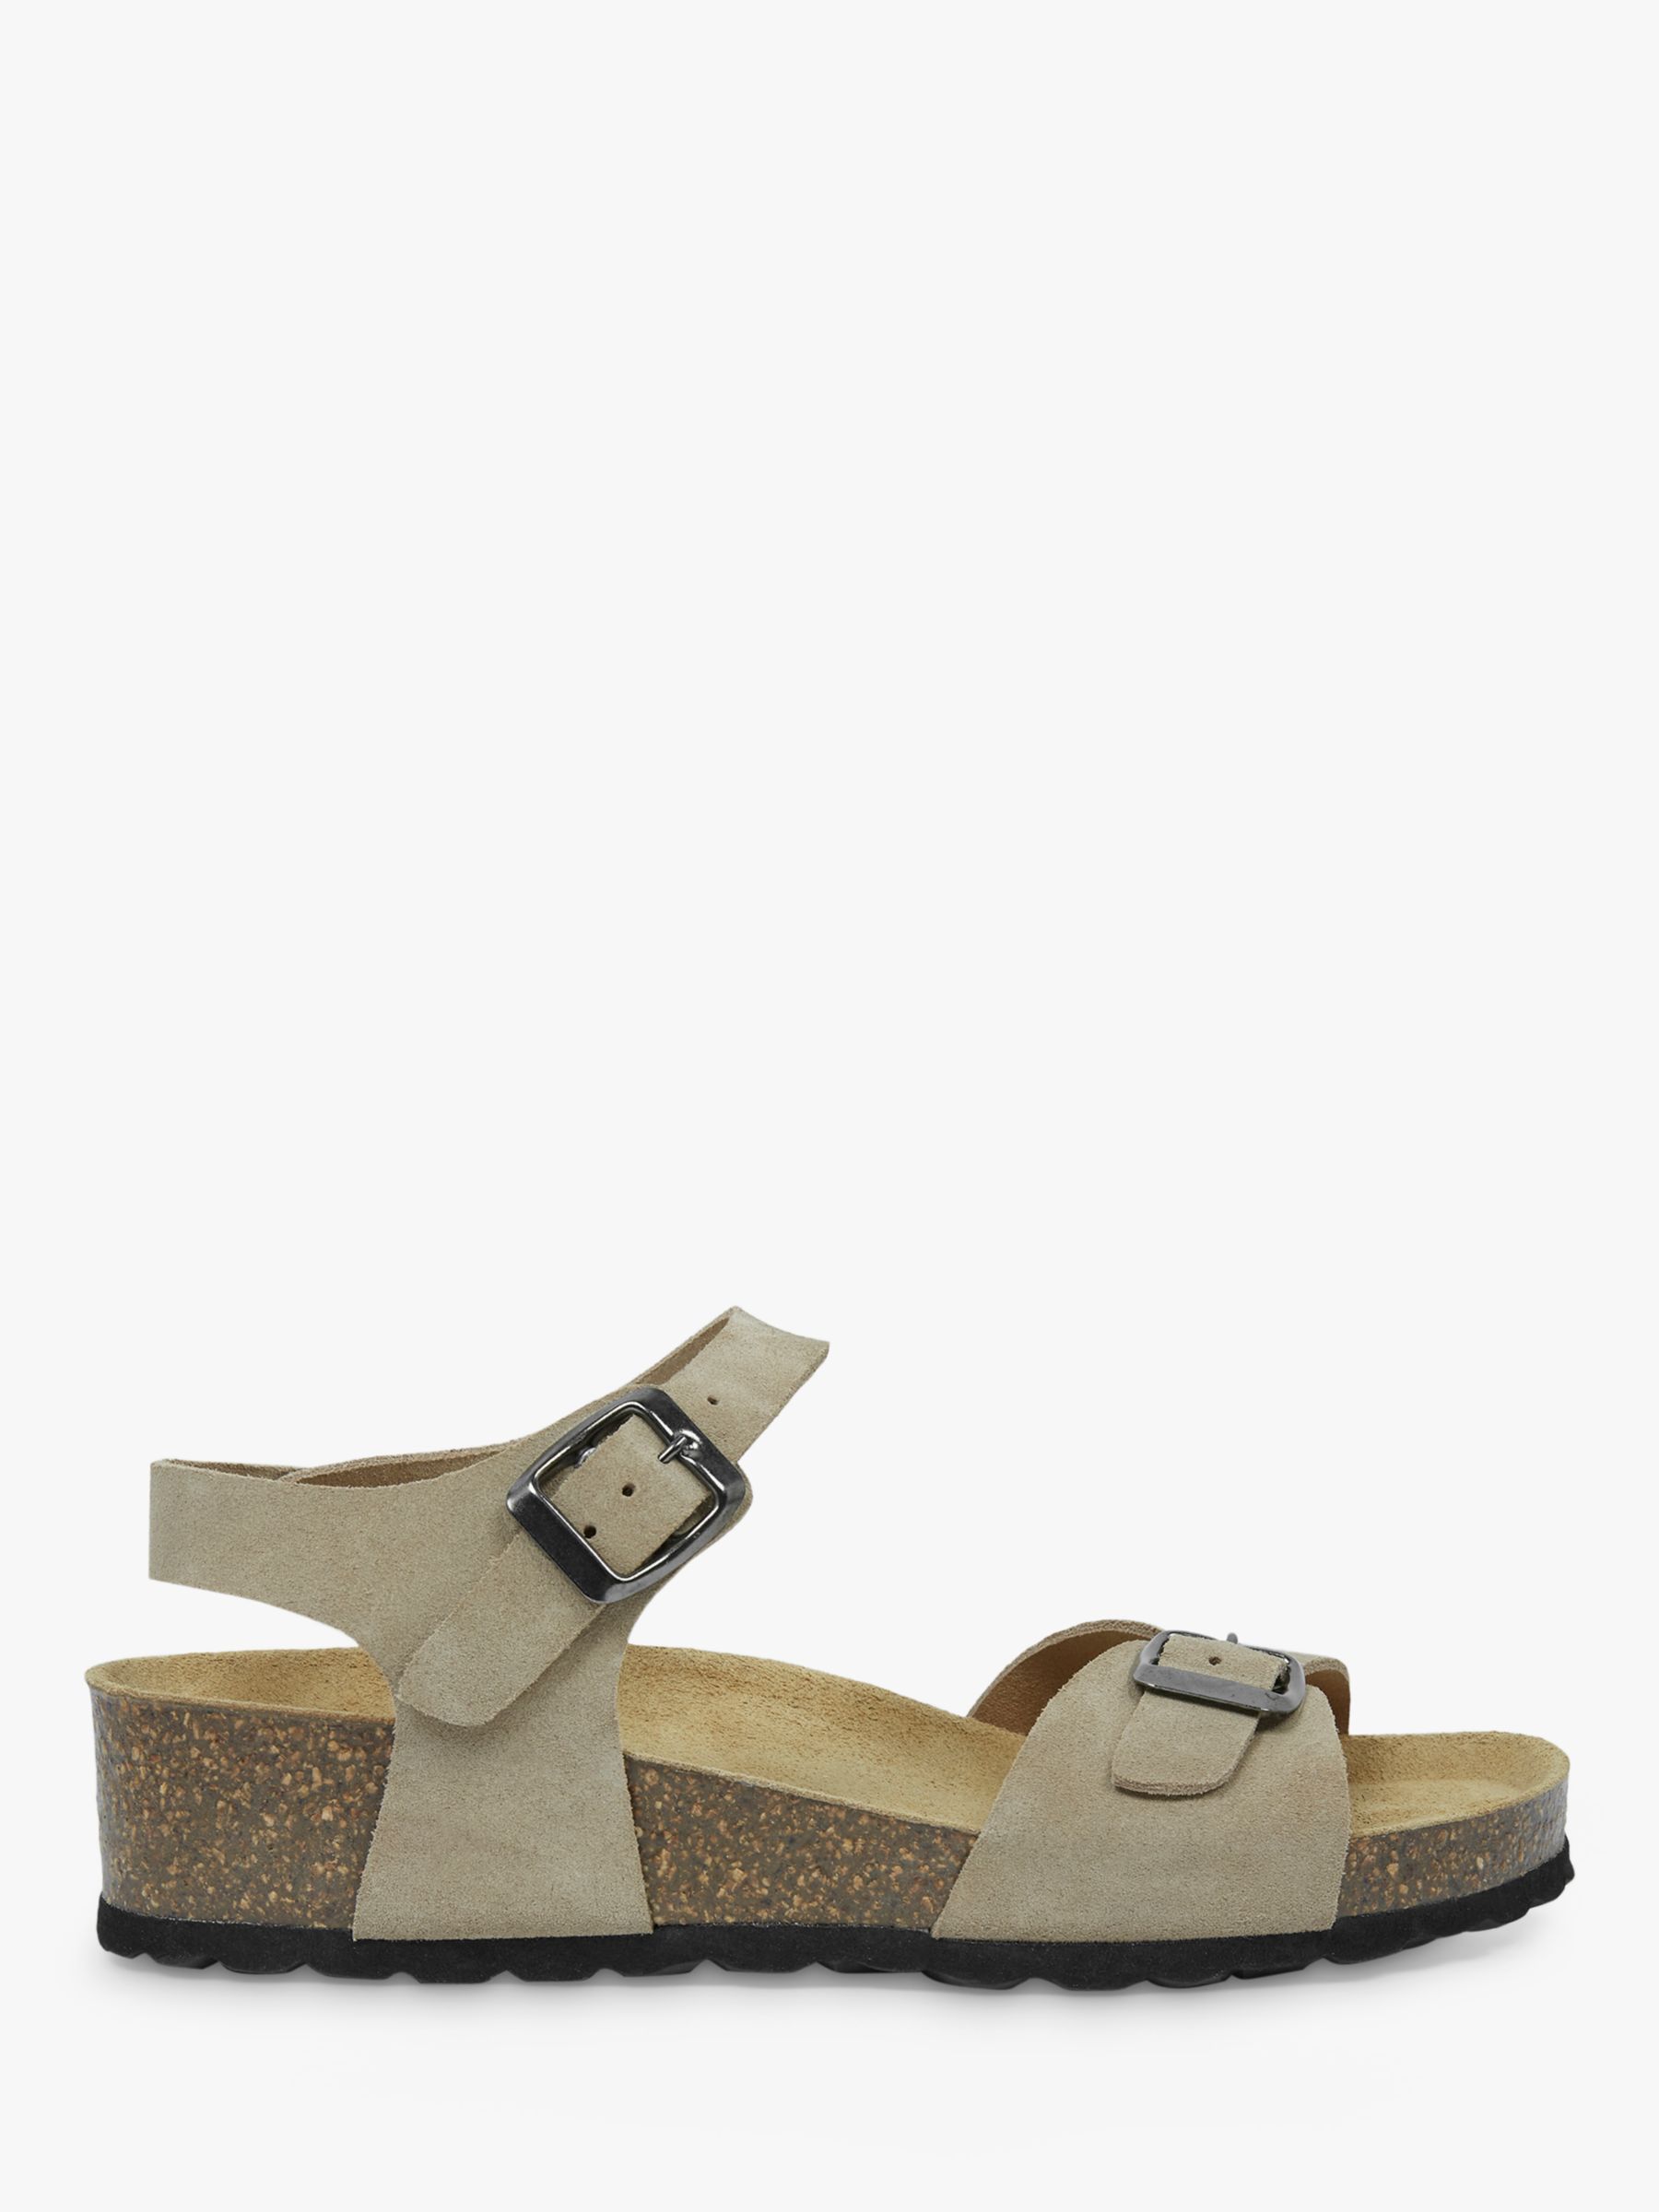 Celtic & Co. Low Wedge Double Buckle Sandals, Camel at John Lewis ...